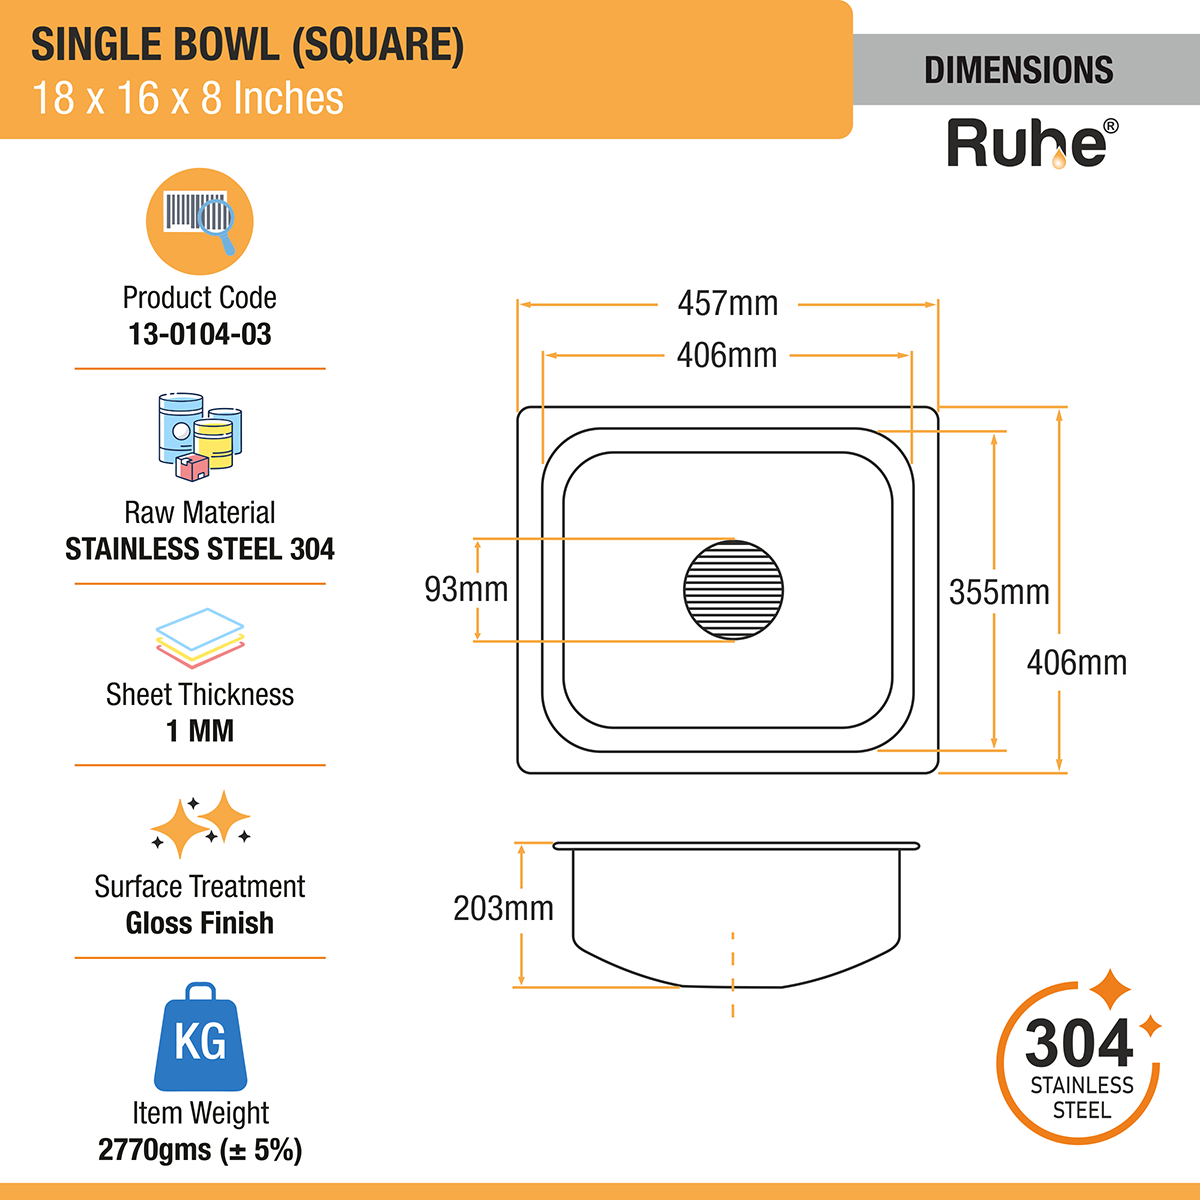 Square Single Bowl (18 x 16 x 8 inches) 304-Grade Kitchen Sink dimensions and sizes